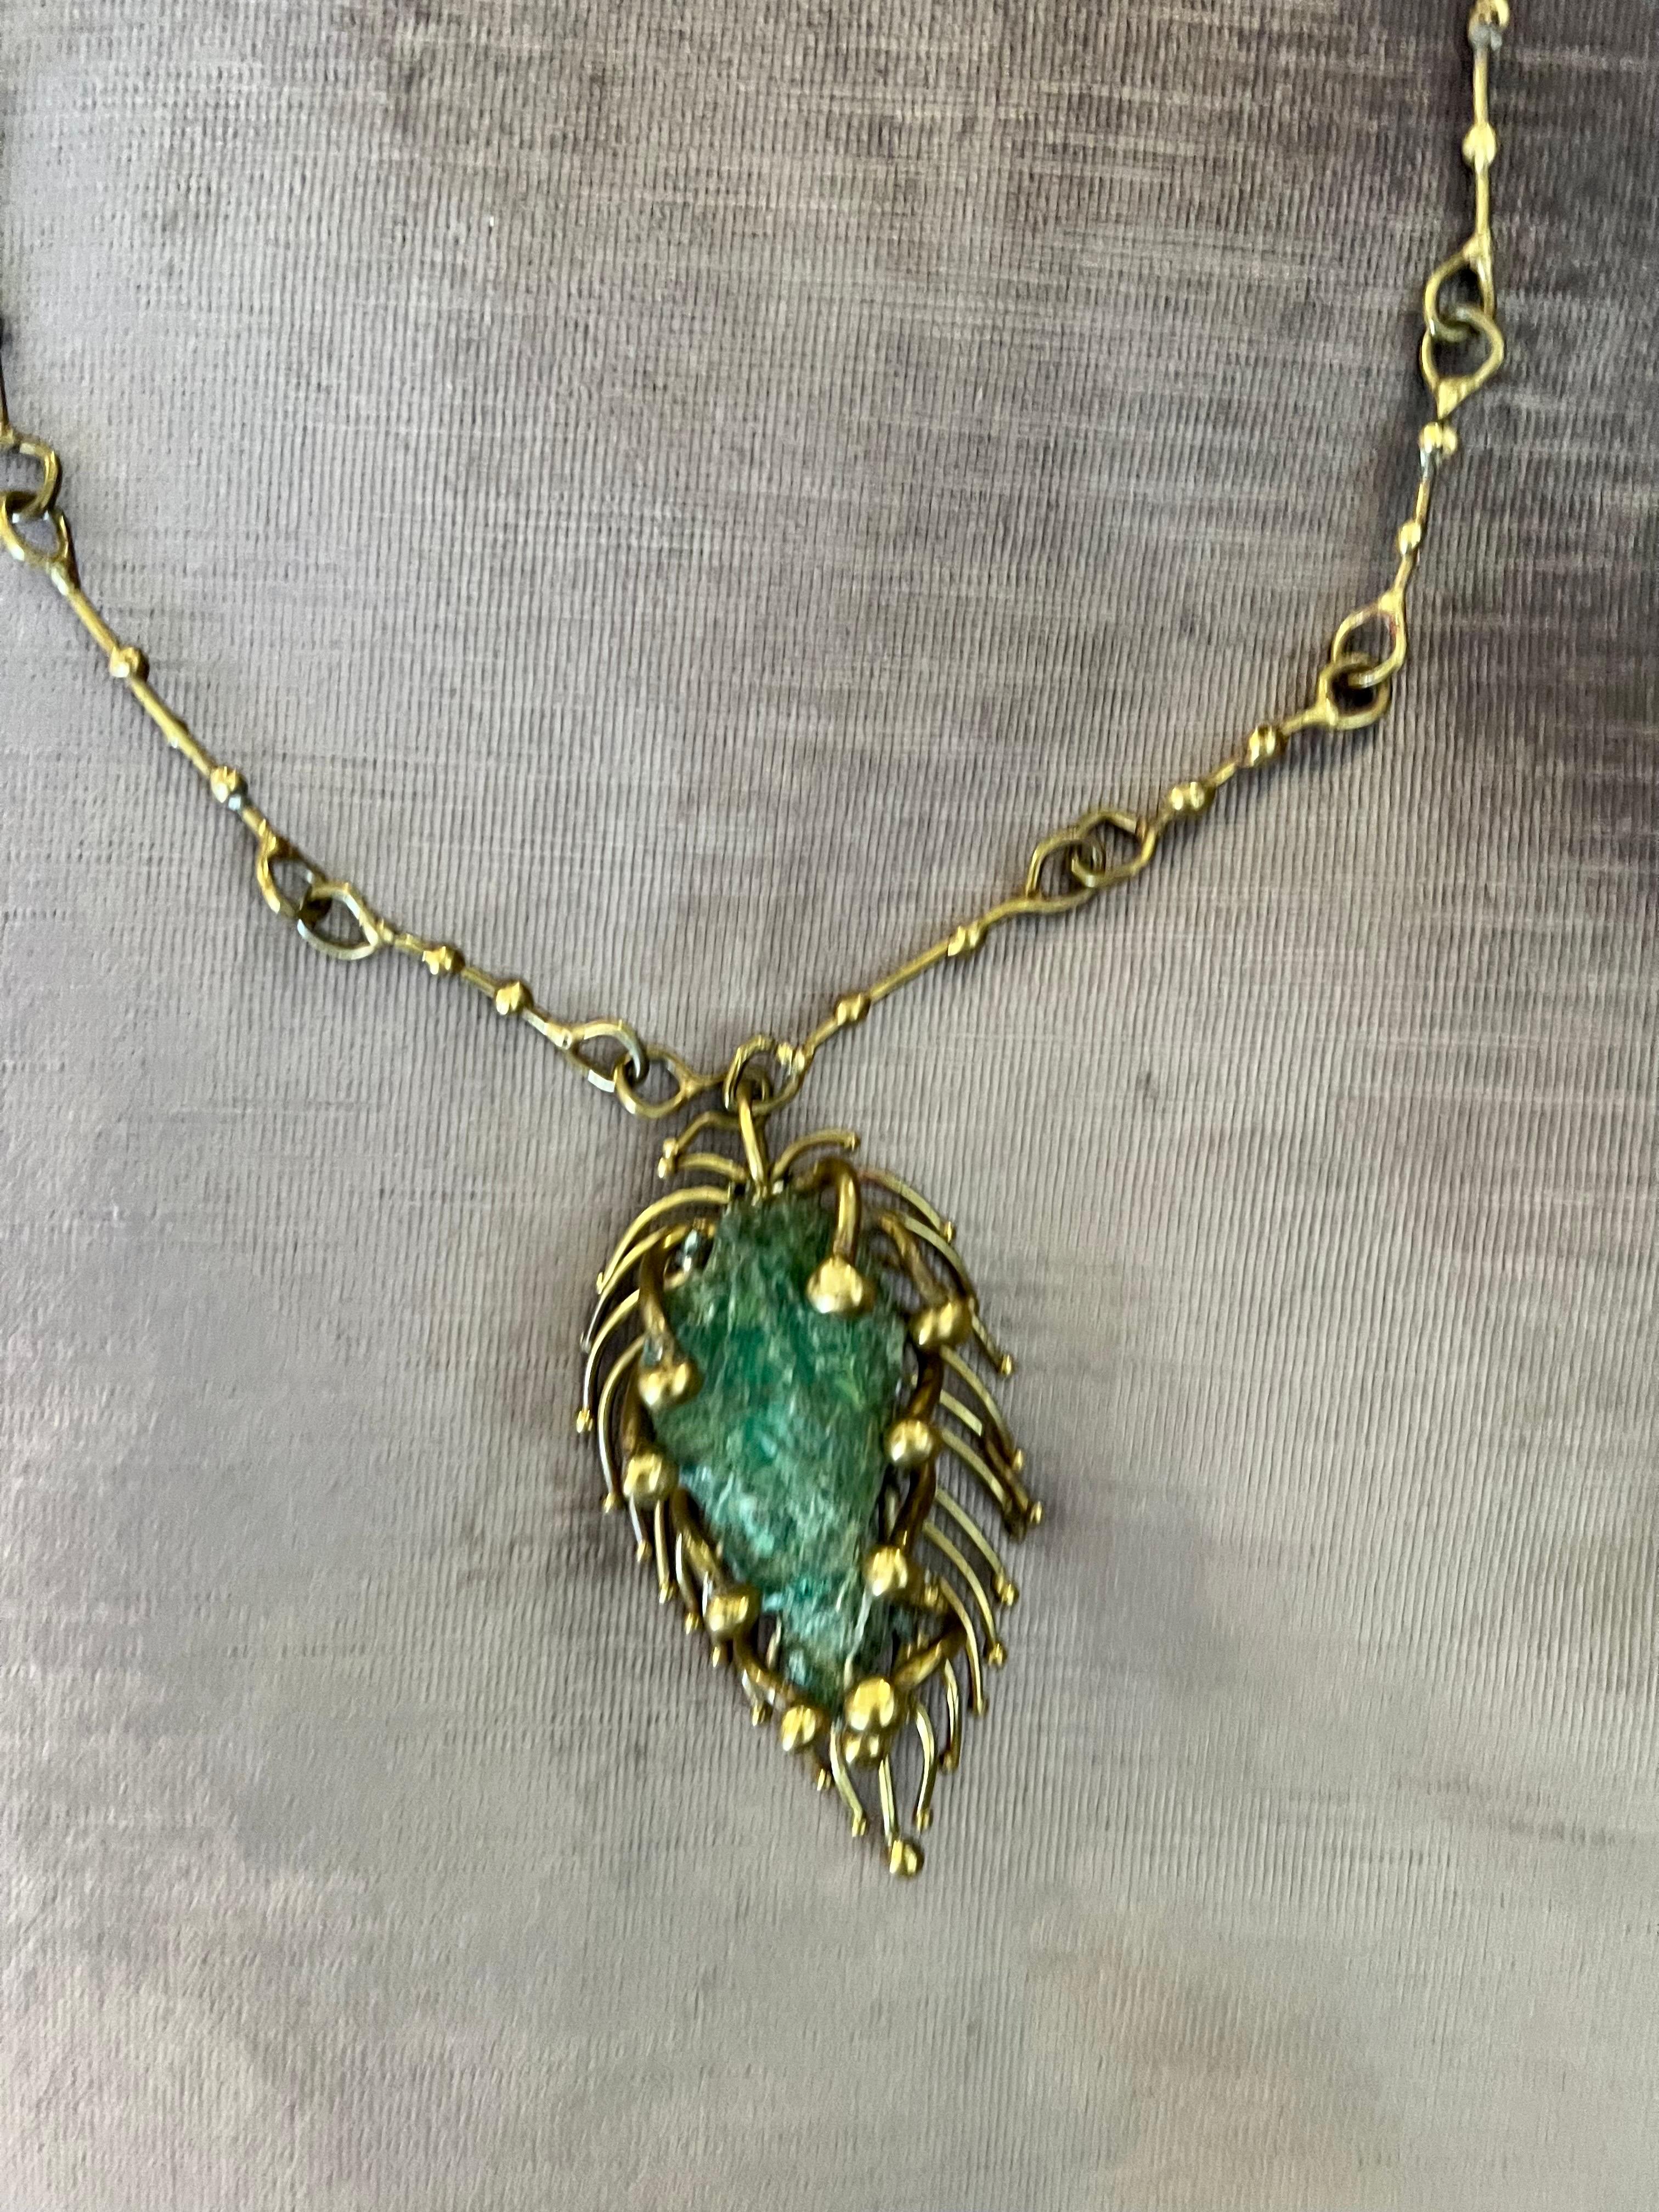 Chain is 23.5 inches long.
Pendant is 3.75 X 2 X 1 inches

This piece is not signed. but the chain matches completely with the signed one that I have.
Pal Kepenyes is a sculptor and researcher of Hungarian art, whose artistic production includes